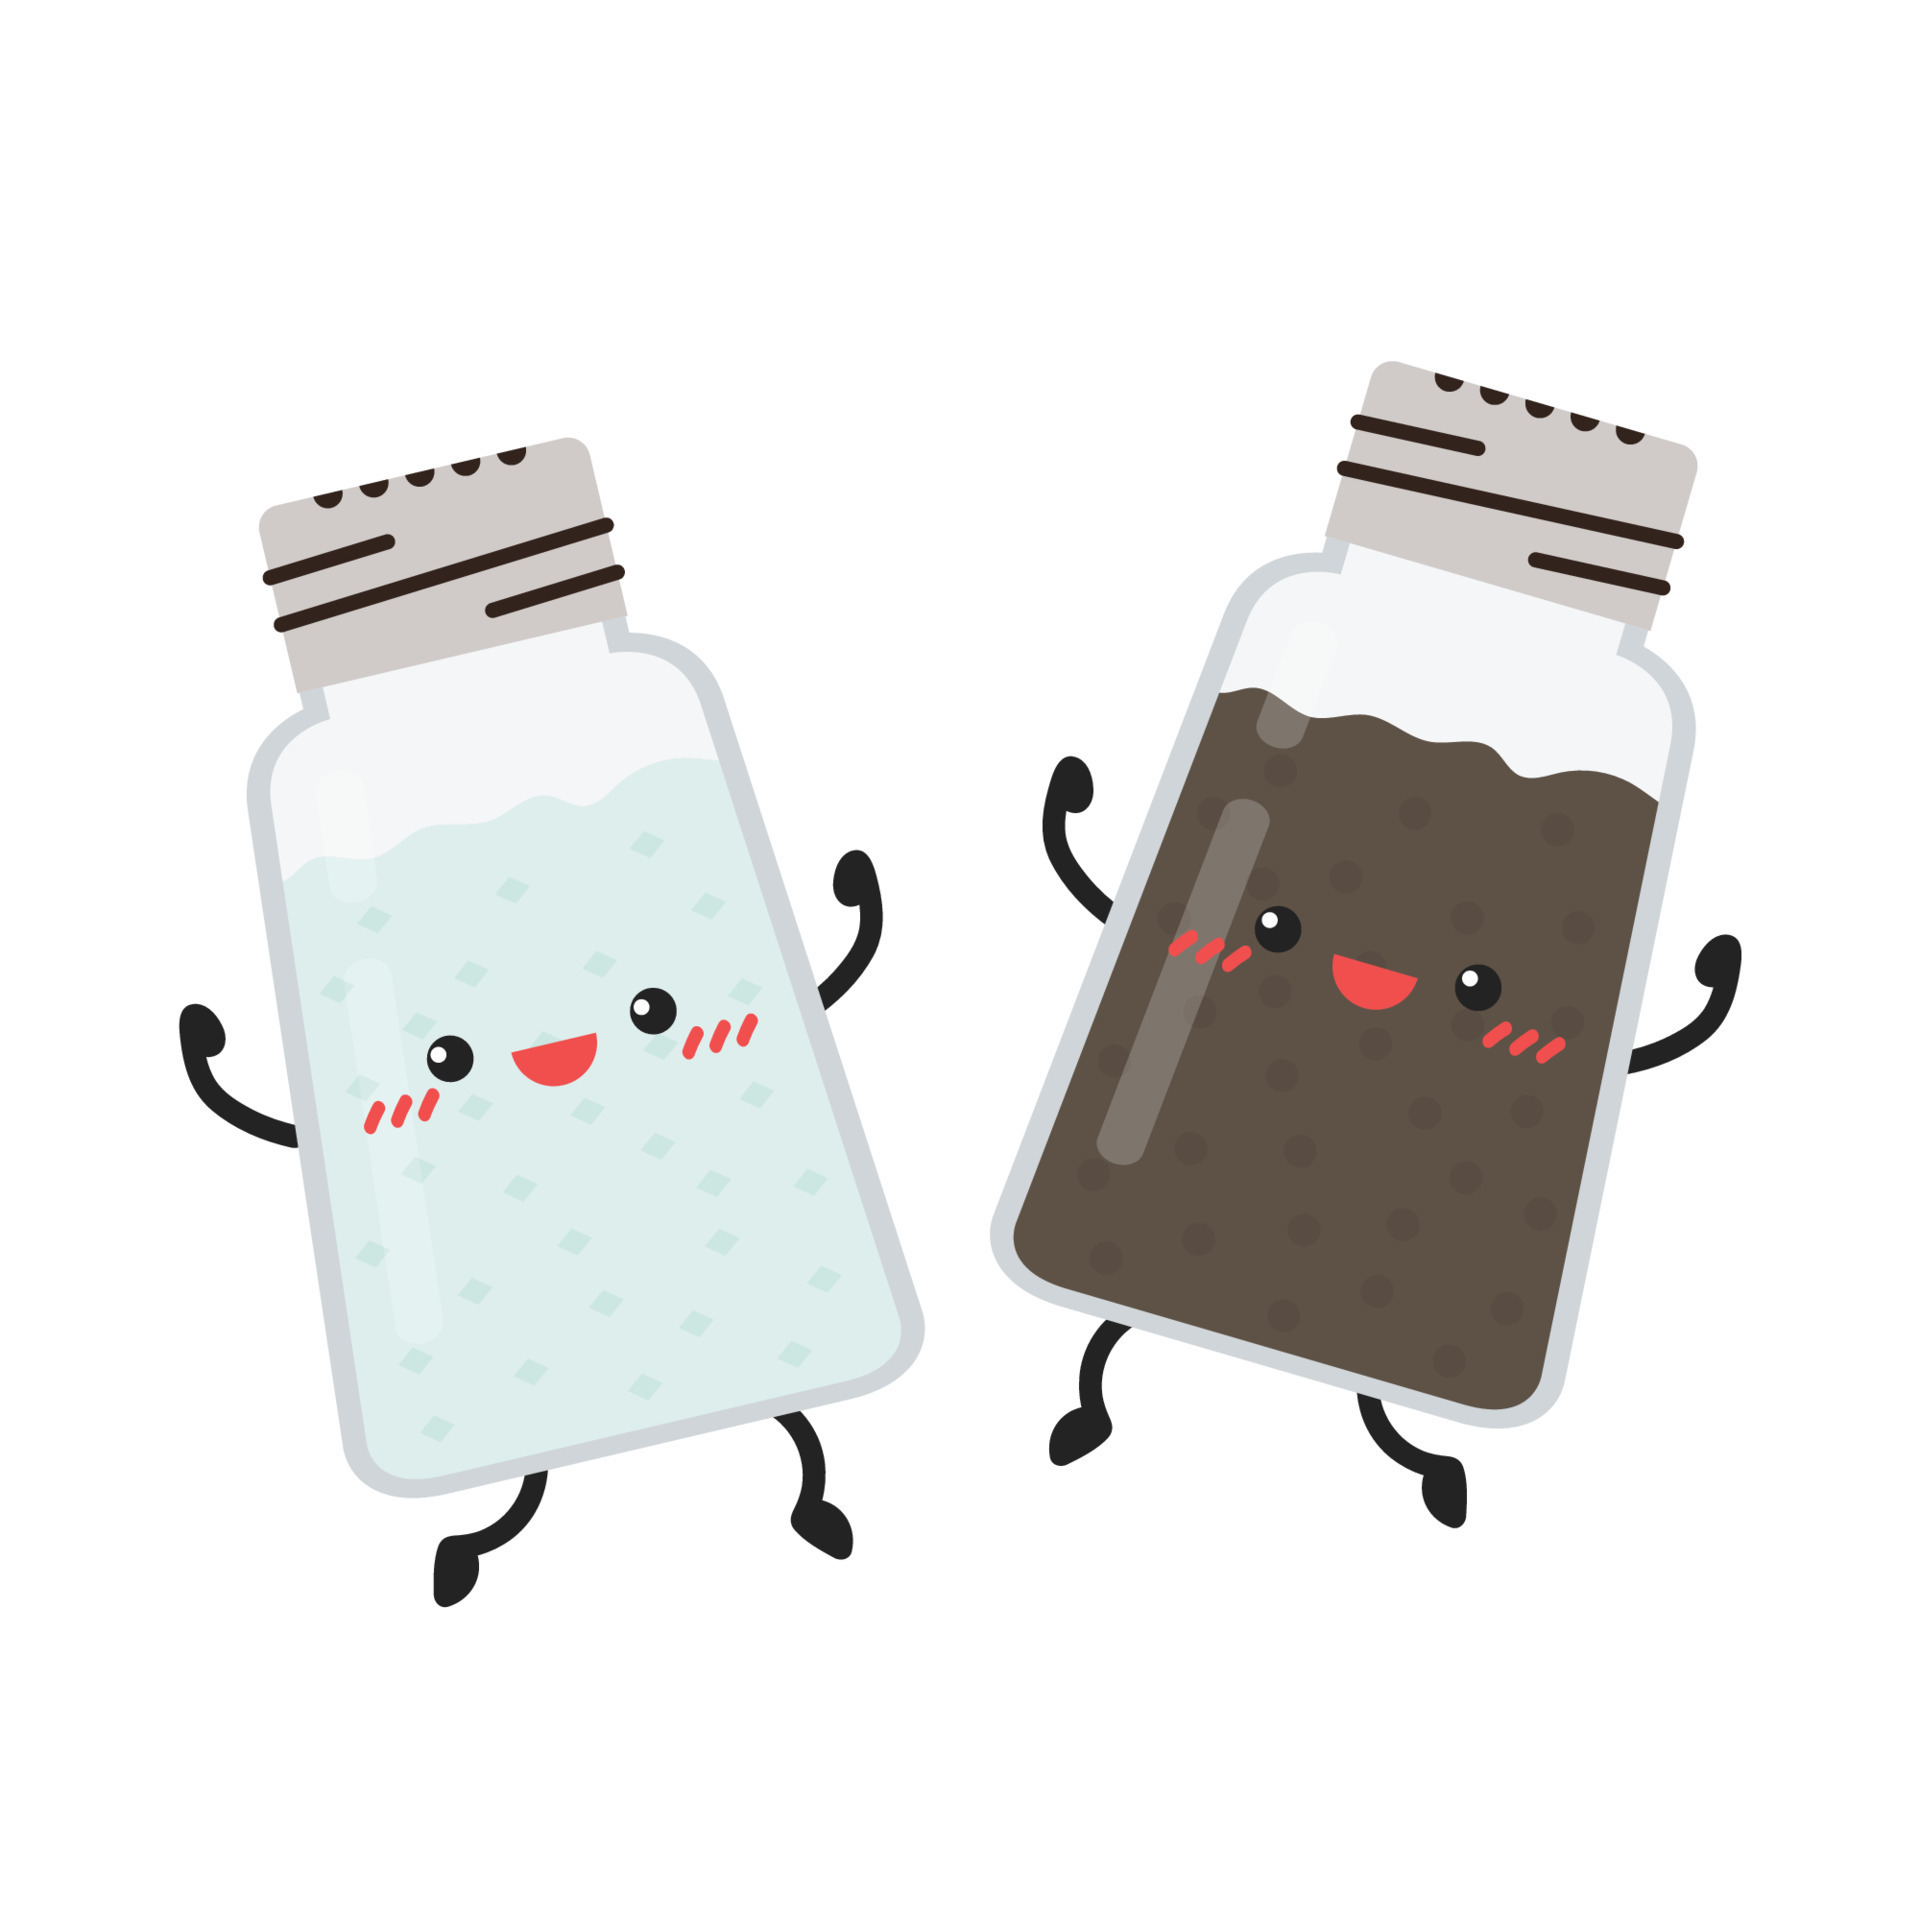 https://static.vecteezy.com/system/resources/previews/014/275/494/original/salt-and-pepper-shaker-cute-cartoon-salt-and-pepper-shaker-couple-with-smiling-faces-kawaii-characters-drawing-free-vector.jpg